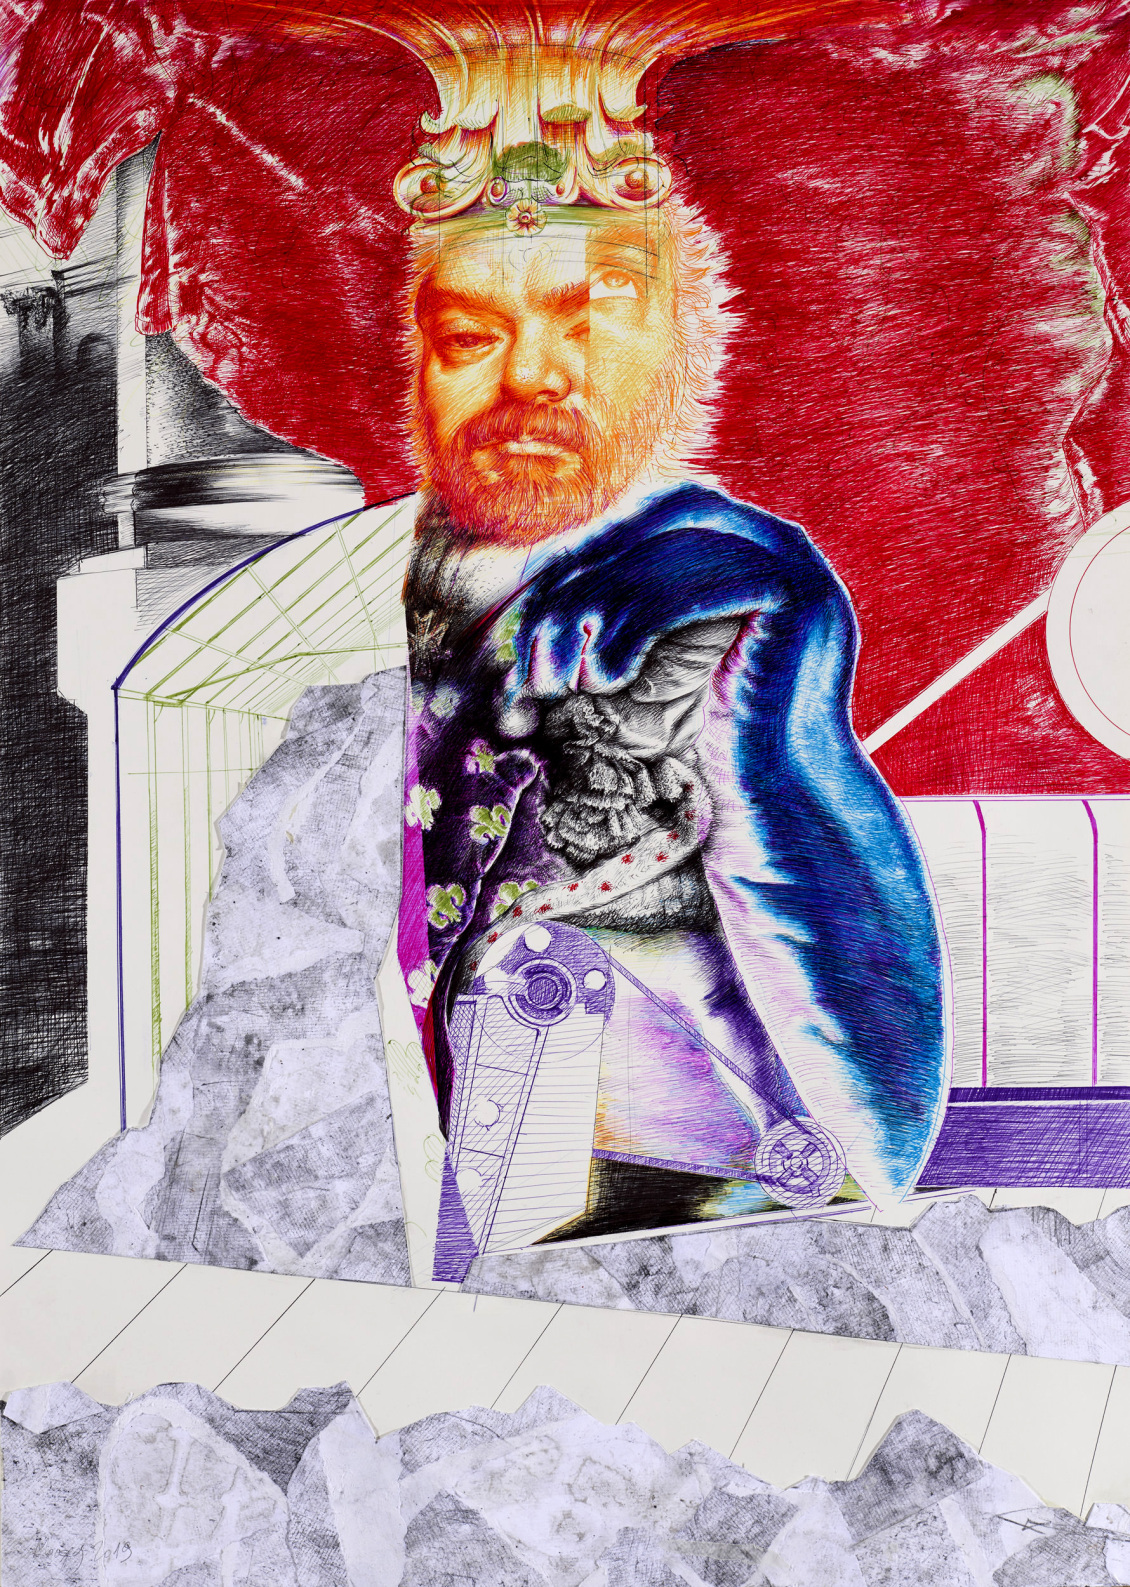 Nikos_Moschos_Stone_grower_n_3_2019_pen_and_collage_on_paper-50x70_cm_ZG